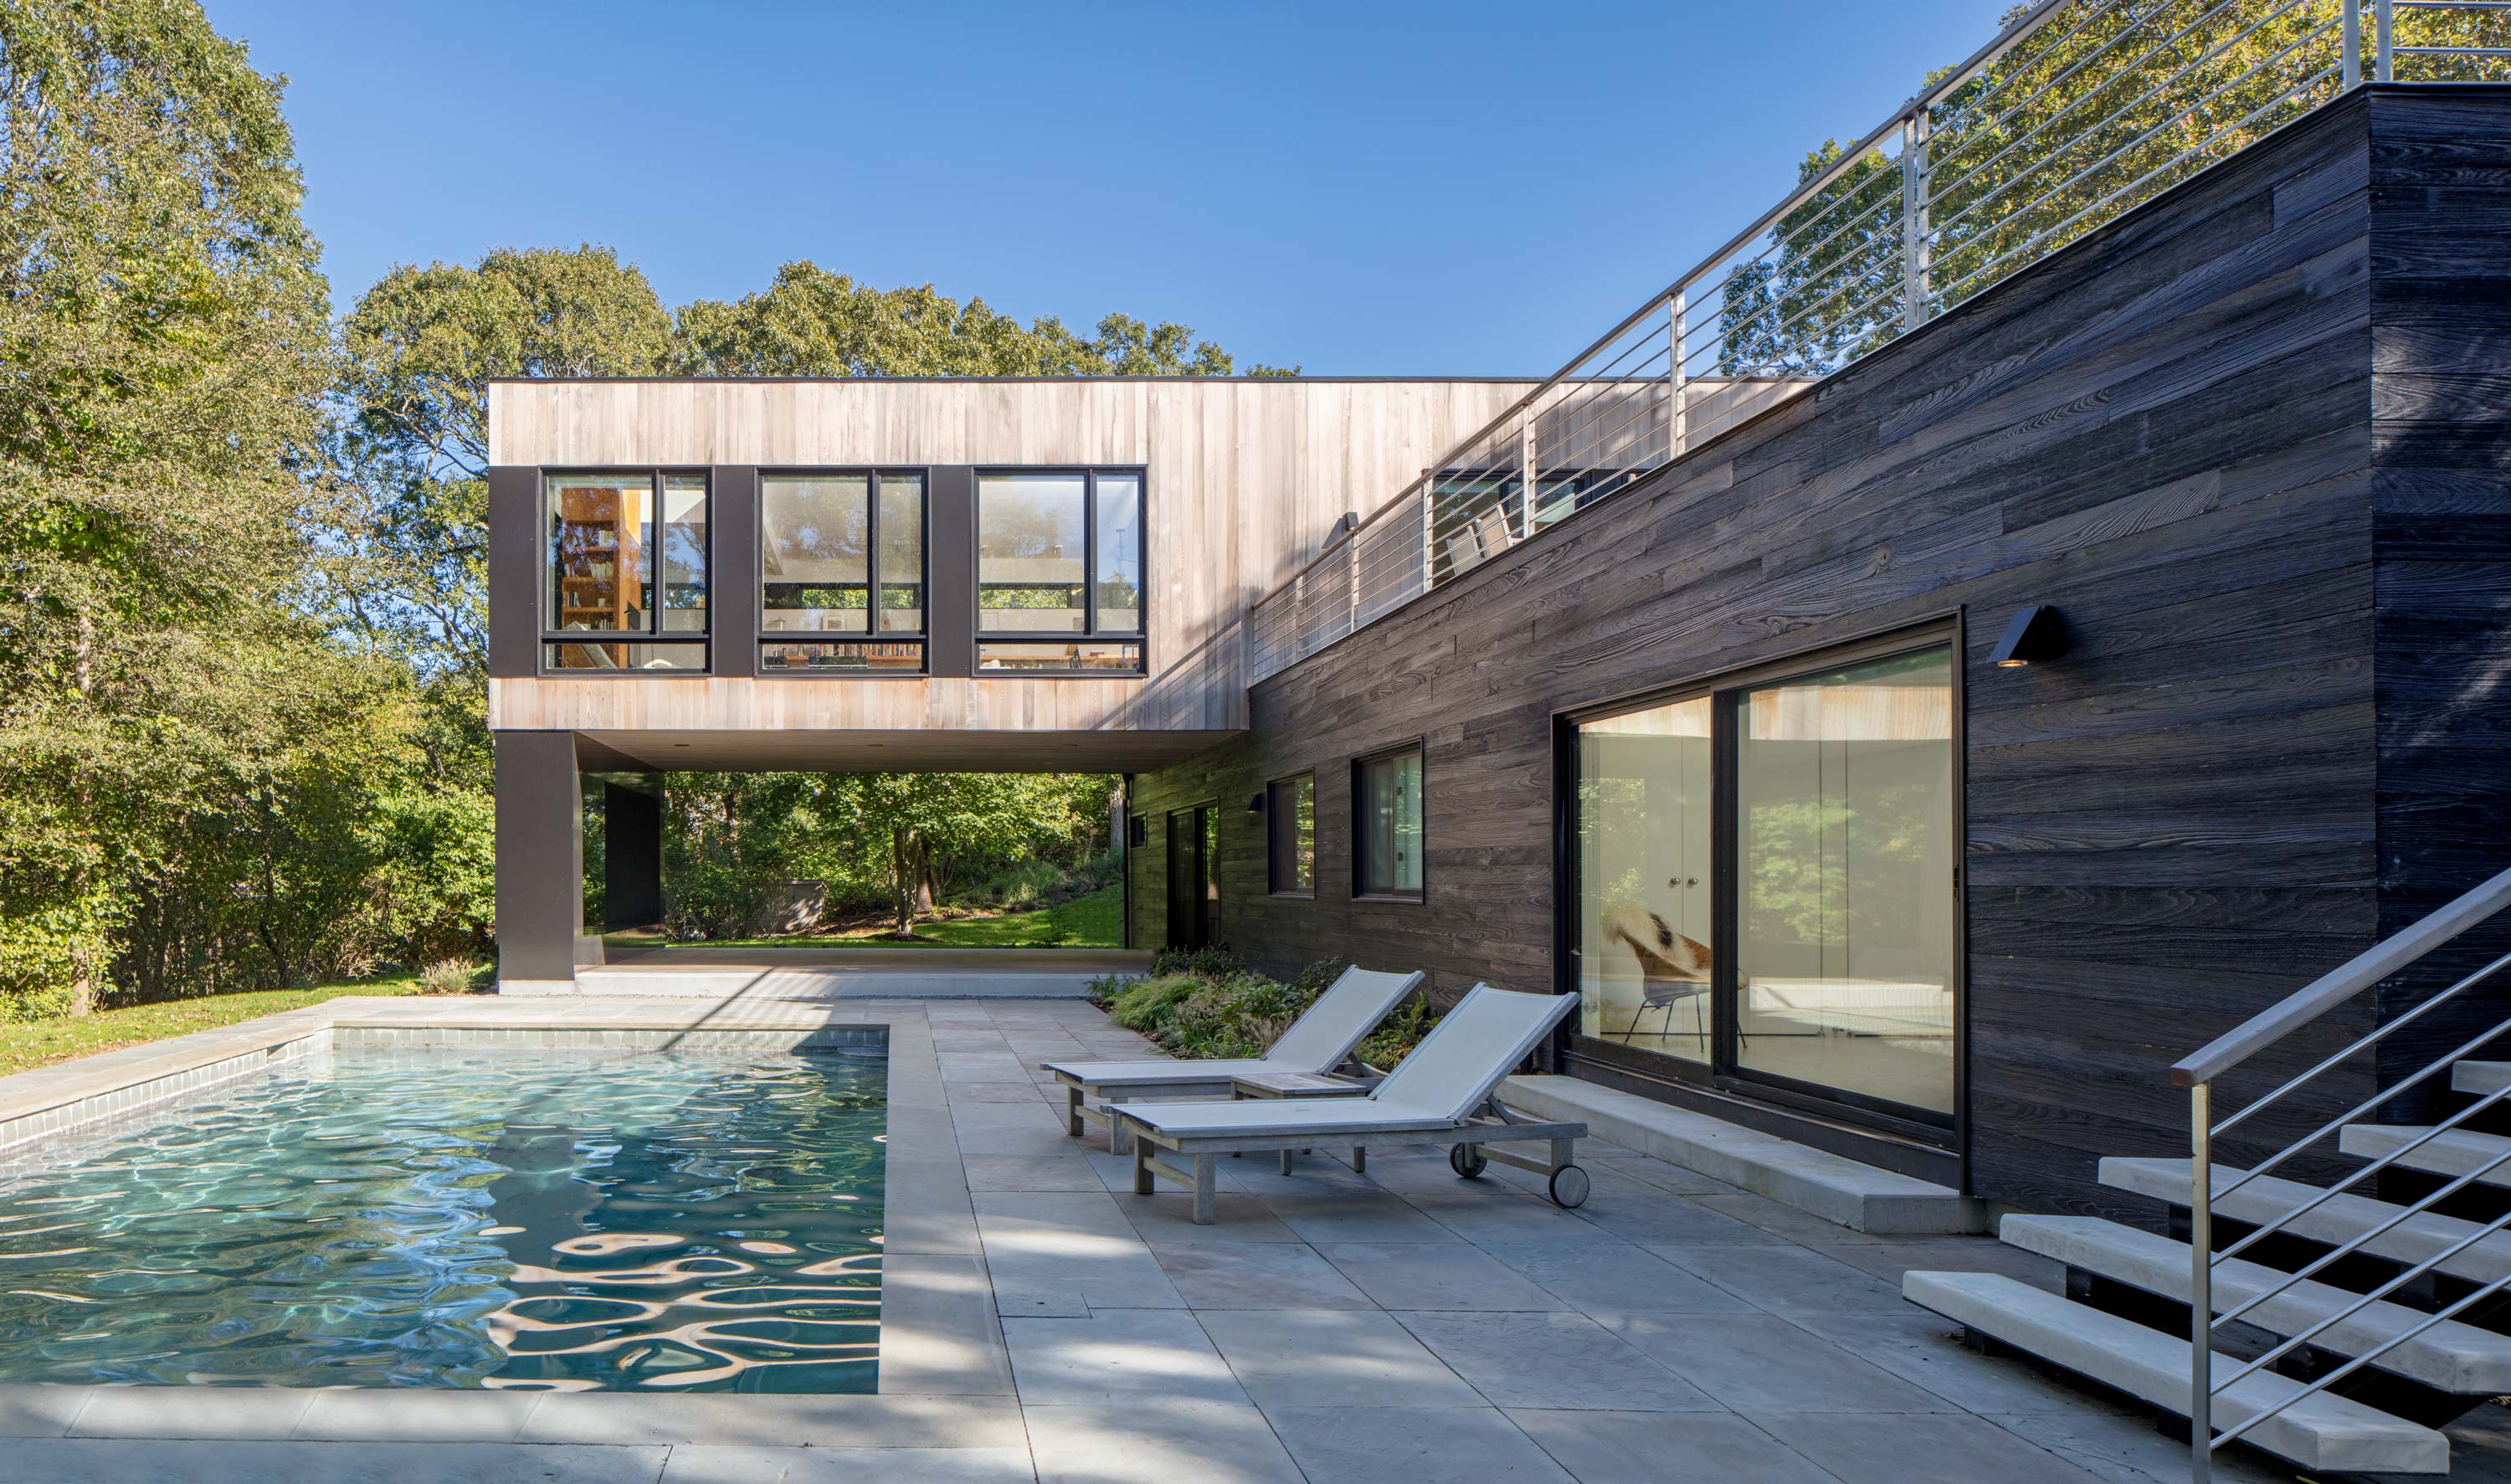 Poolside of Bridgehampton House by Specht Novak Architects featuring cantilevered second floor and wood-paneled exterior. Shot by Taggart Sorensen.